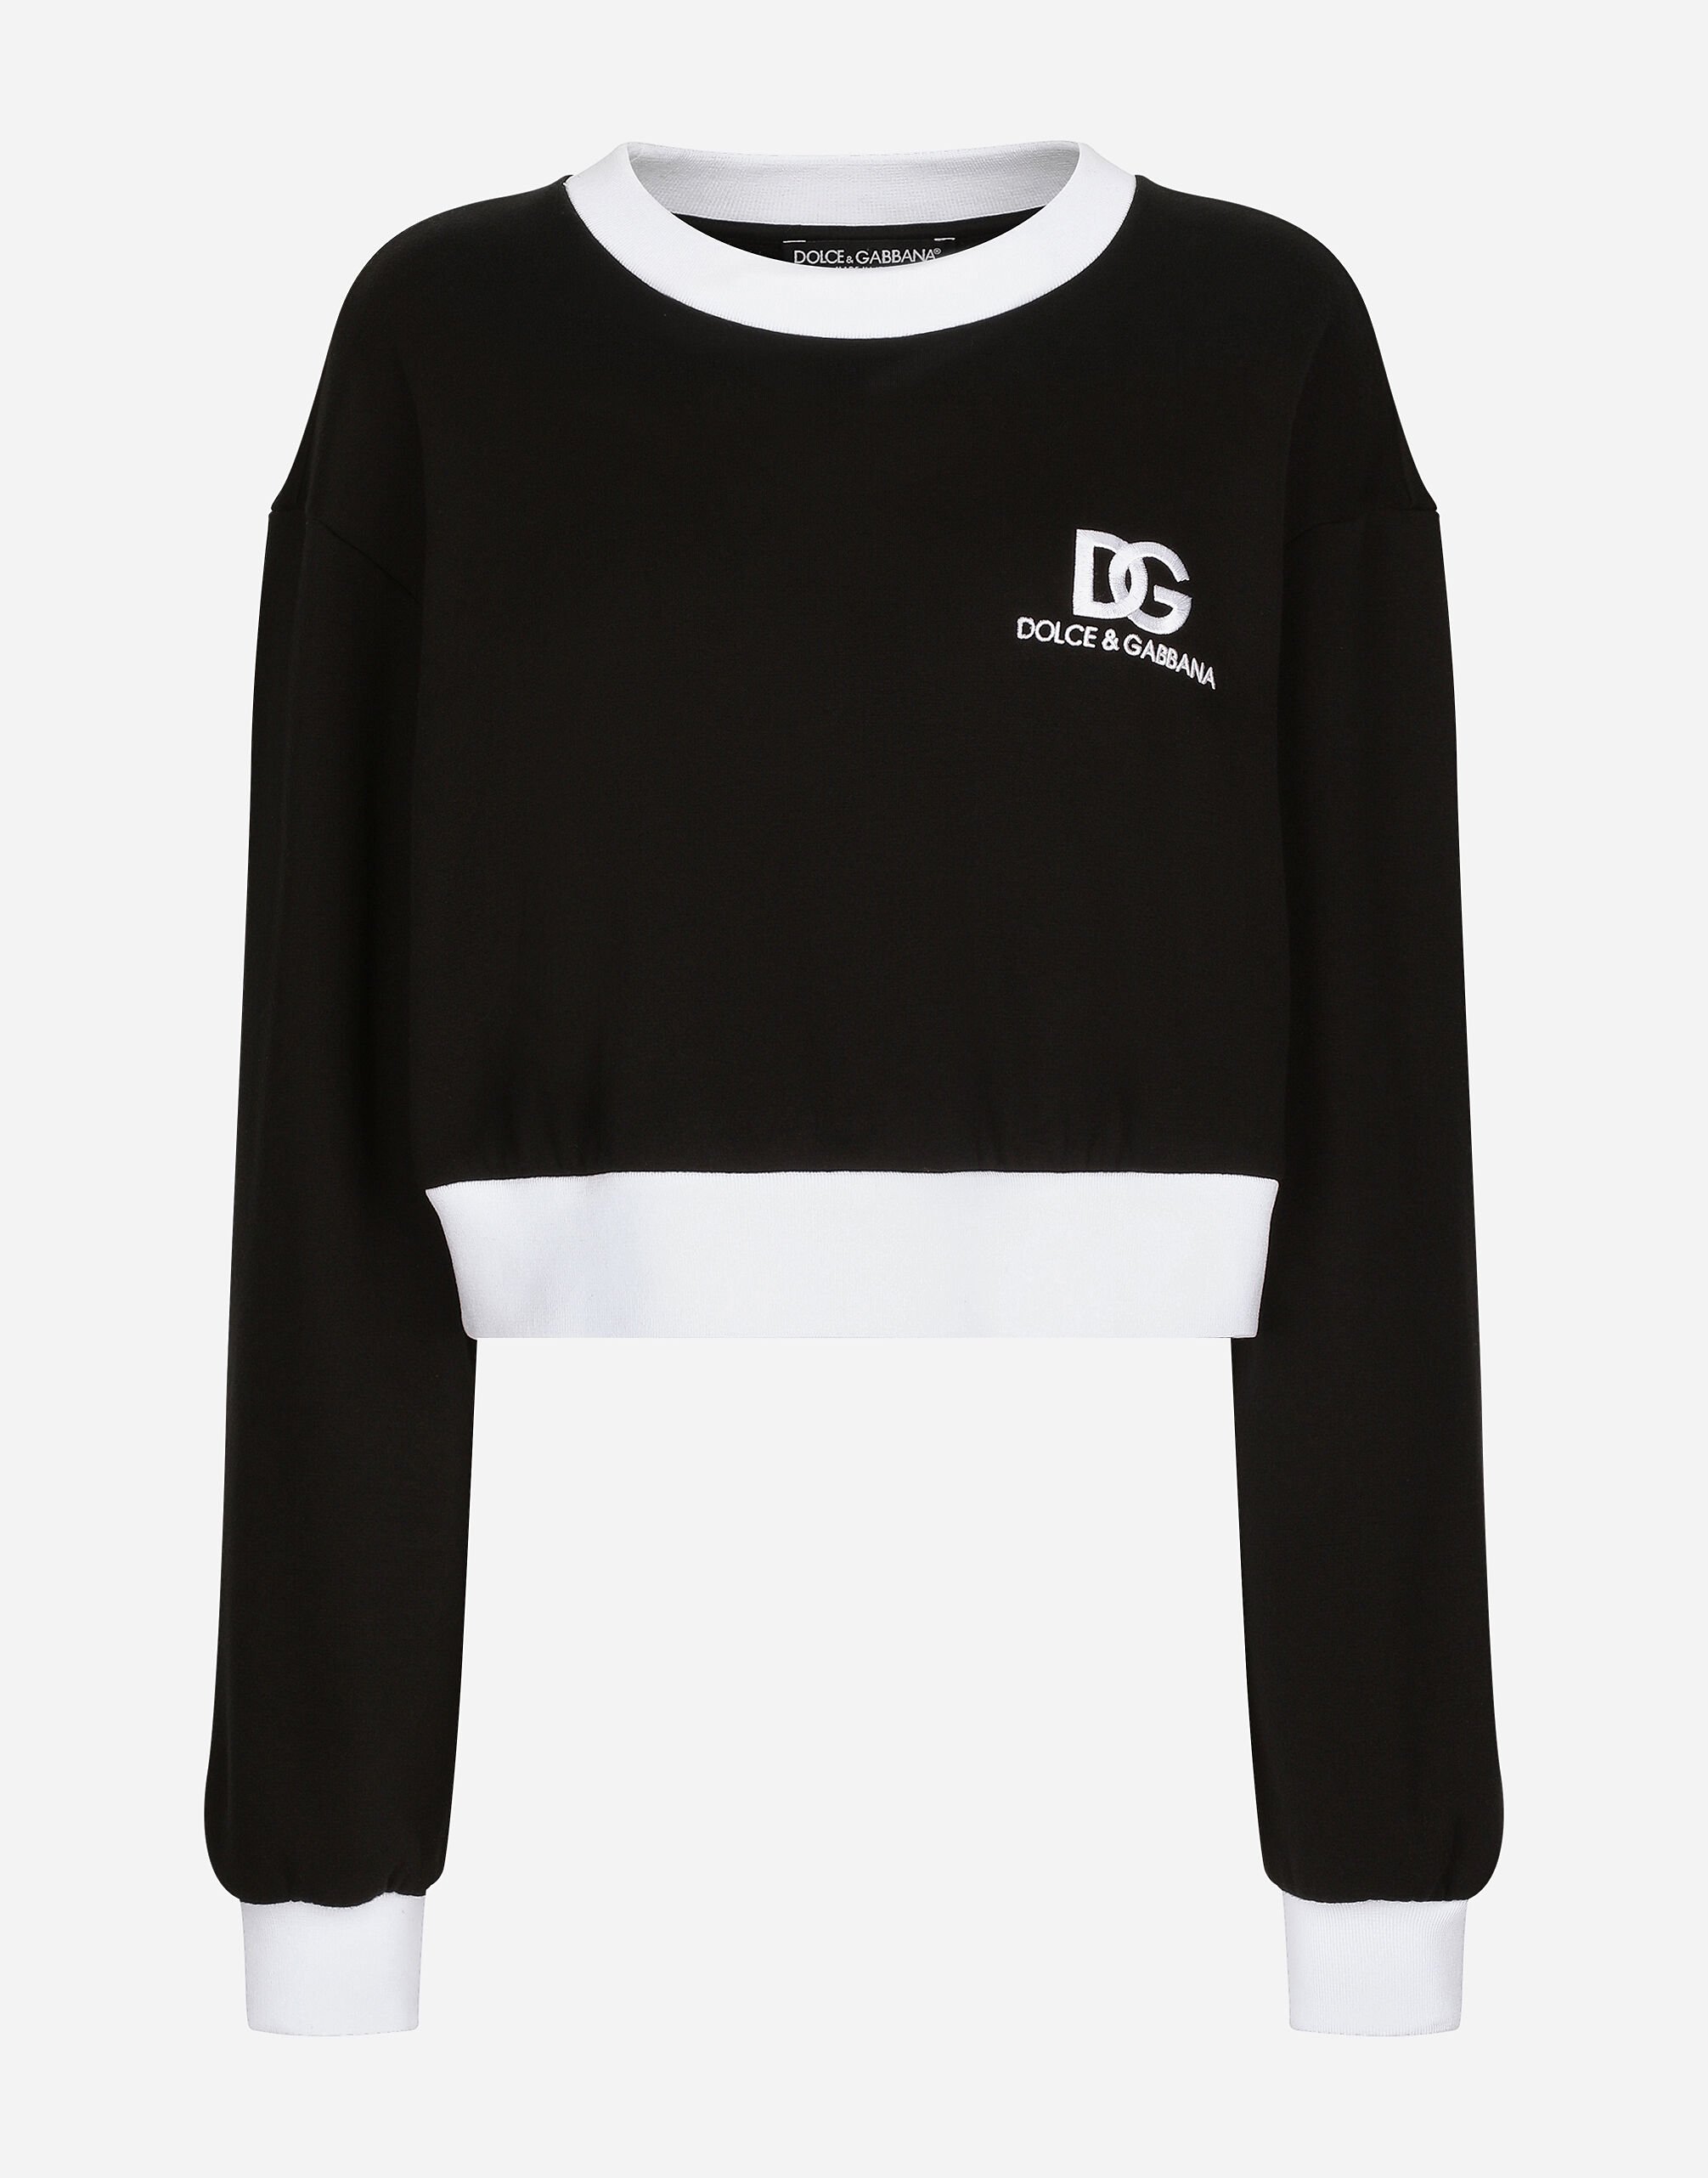 Dolce & Gabbana Jersey sweatshirt with DG logo embroidery Gold BB7287AY828